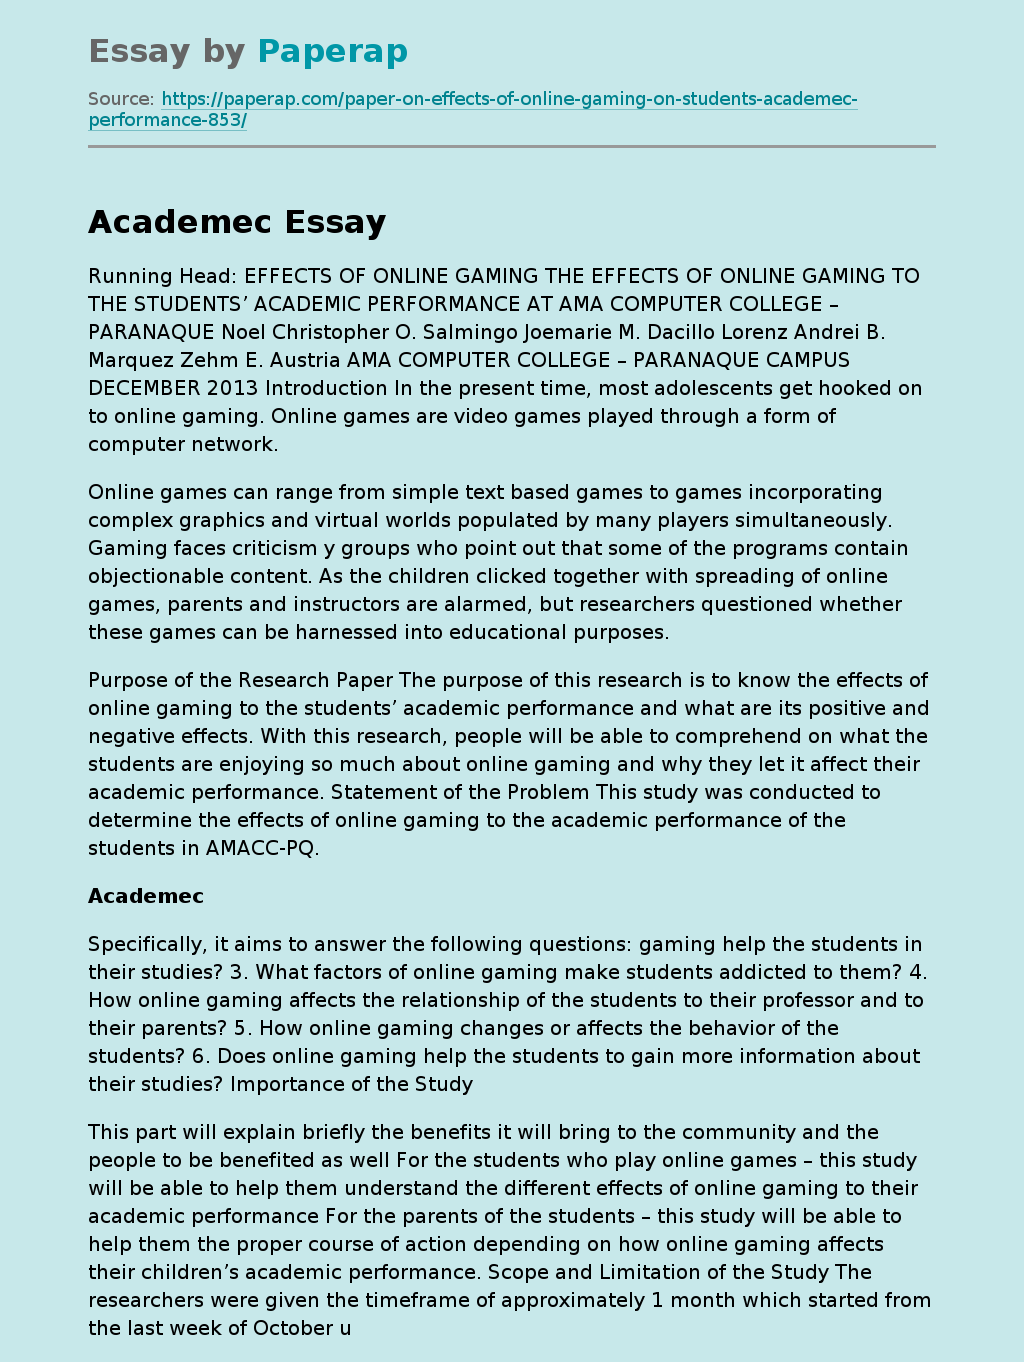 Effects of Online Gaming on Students Academec Performance